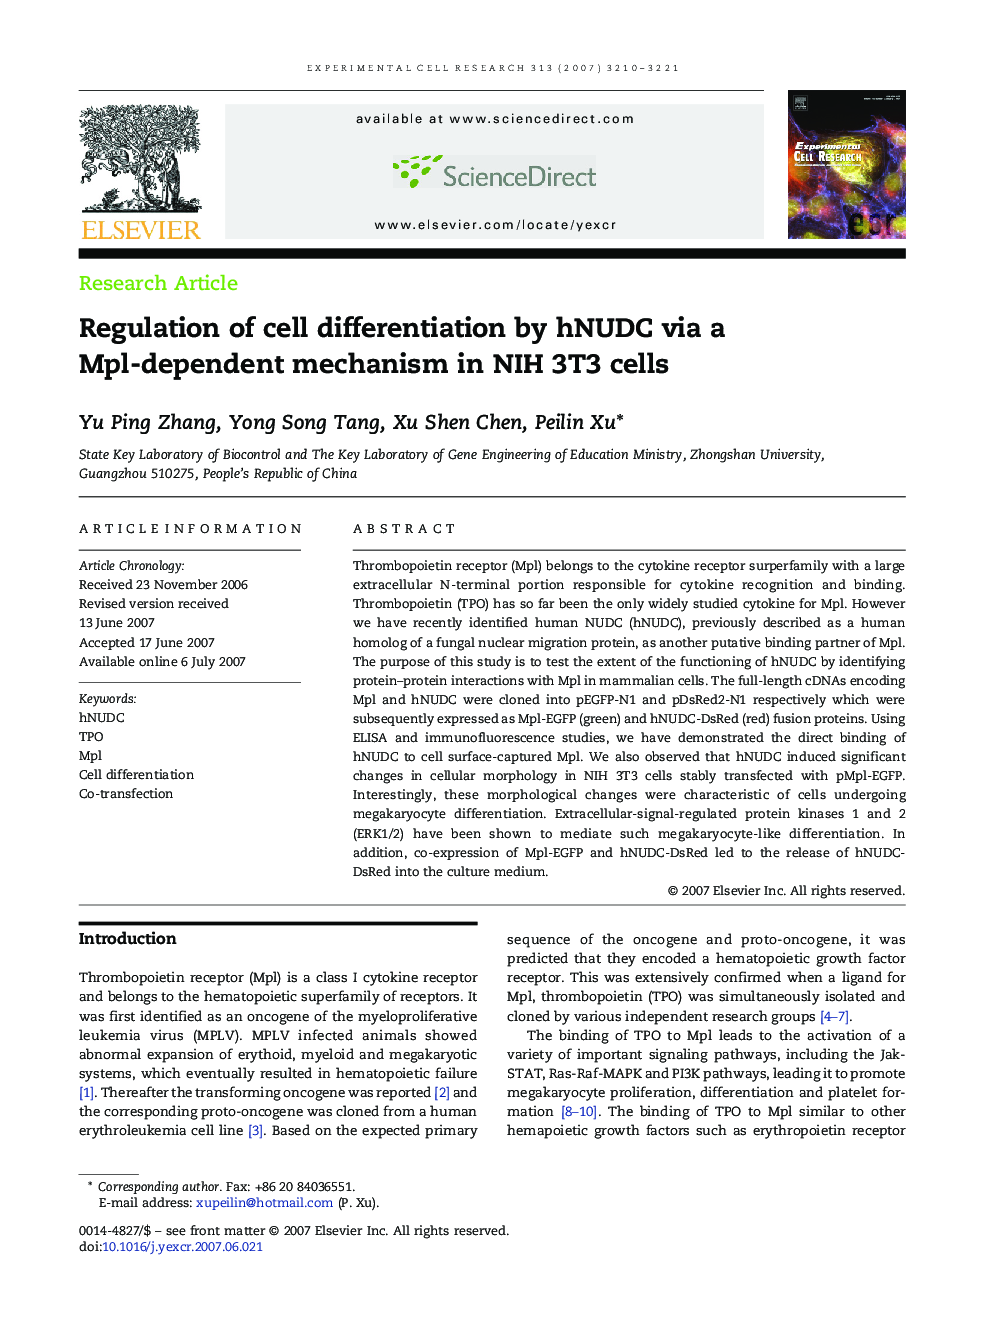 Regulation of cell differentiation by hNUDC via a Mpl-dependent mechanism in NIH 3T3 cells